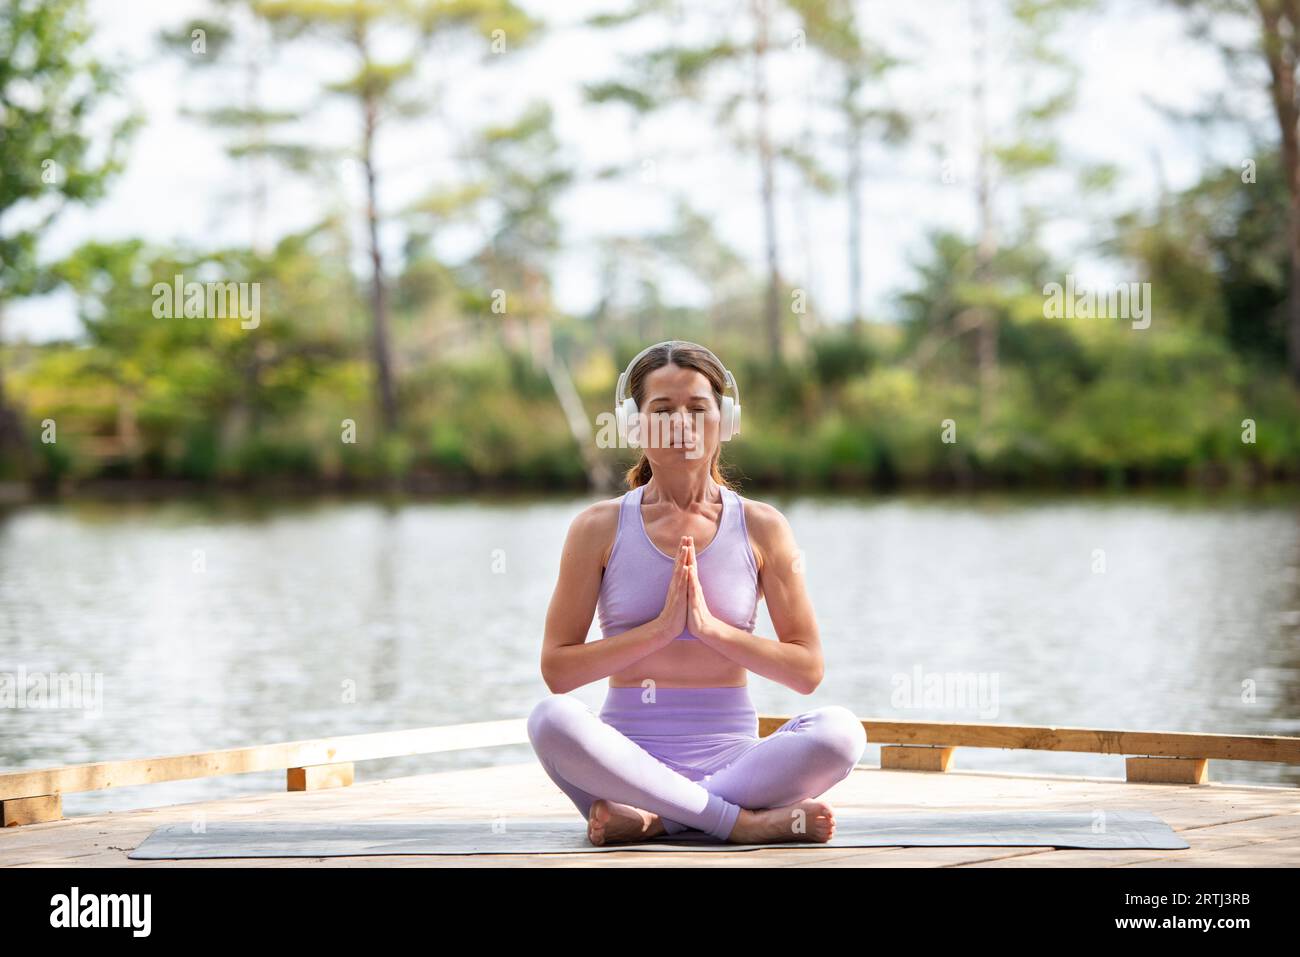 Sporty woman practicing yoga on a jetty by a lake, sitting meditating wearing headphones, part of series. Stock Photo